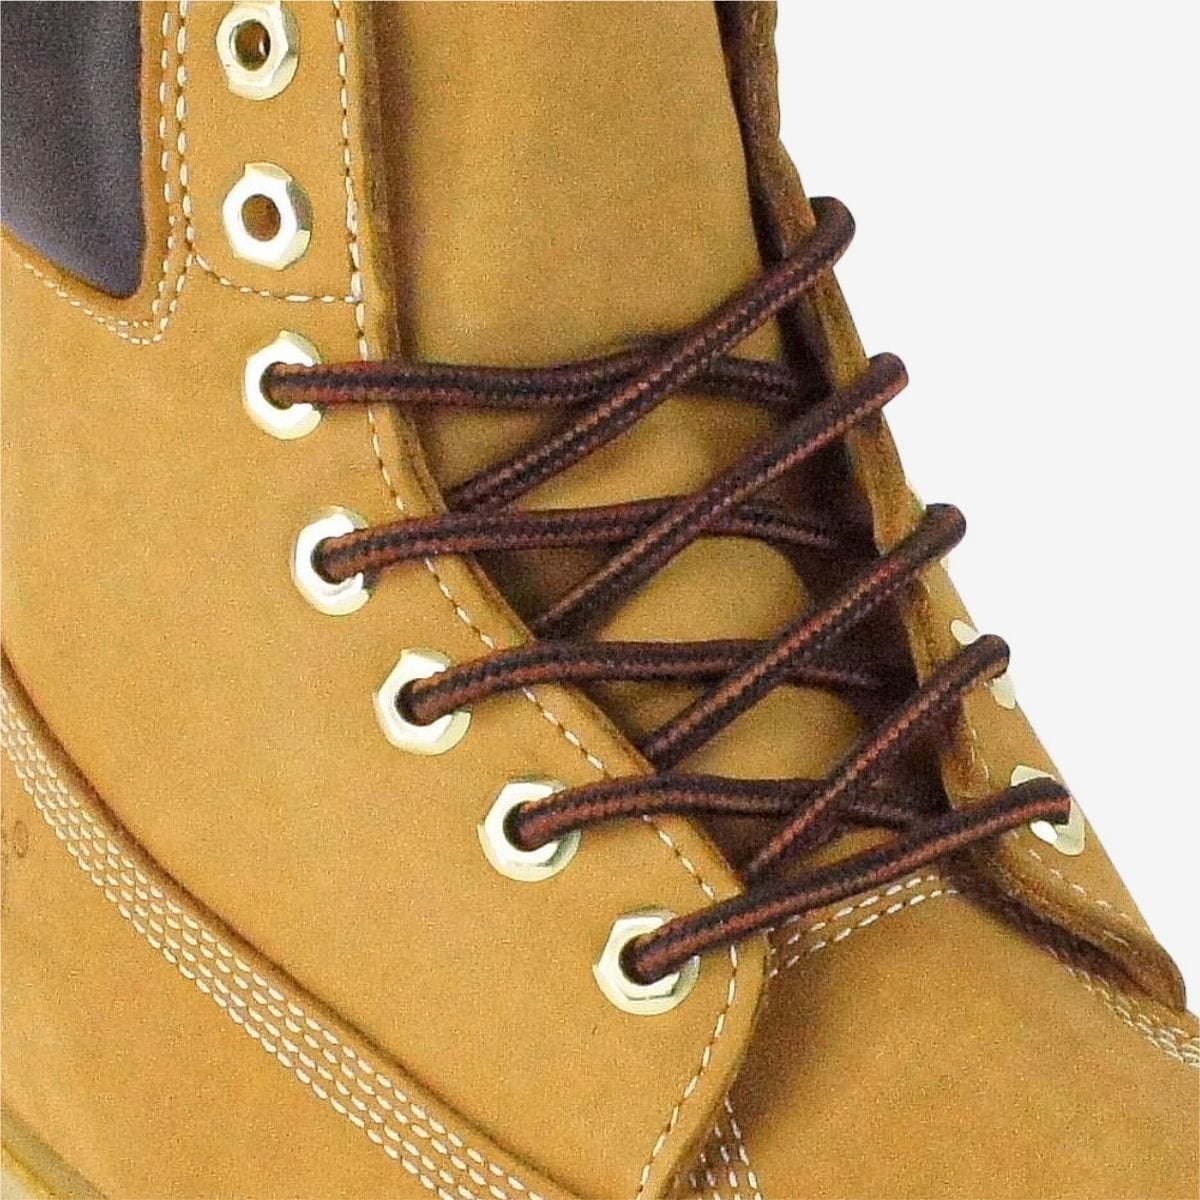 shop-round-shoelaces-online-in-deep-brown-and-black-for-boots-sneakers-and-running-shoes